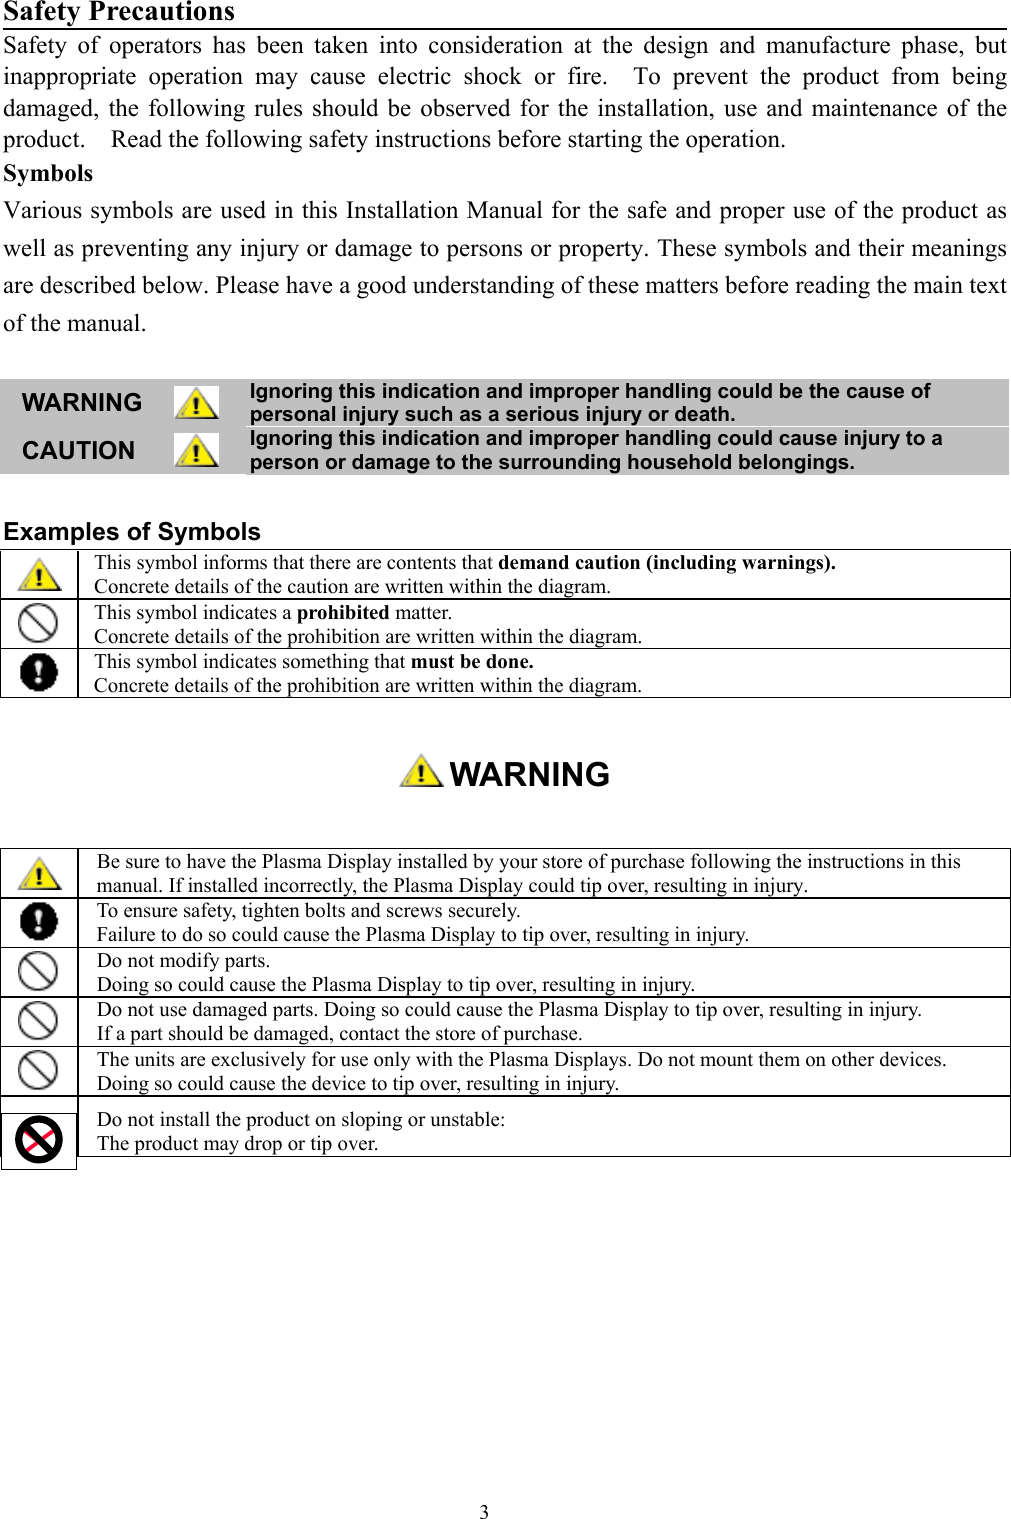 3Safety PrecautionsSafety of operators has been taken into consideration at the design and manufacture phase, butinappropriate operation may cause electric shock or fire.  To prevent the product from beingdamaged, the following rules should be observed for the installation, use and maintenance of theproduct.    Read the following safety instructions before starting the operation.SymbolsVarious symbols are used in this Installation Manual for the safe and proper use of the product aswell as preventing any injury or damage to persons or property. These symbols and their meaningsare described below. Please have a good understanding of these matters before reading the main textof the manual.WARNING Ignoring this indication and improper handling could be the cause ofpersonal injury such as a serious injury or death.CAUTION Ignoring this indication and improper handling could cause injury to aperson or damage to the surrounding household belongings.Examples of SymbolsThis symbol informs that there are contents that demand caution (including warnings).Concrete details of the caution are written within the diagram.This symbol indicates a prohibited matter.Concrete details of the prohibition are written within the diagram.This symbol indicates something that must be done.Concrete details of the prohibition are written within the diagram. WARNINGBe sure to have the Plasma Display installed by your store of purchase following the instructions in thismanual. If installed incorrectly, the Plasma Display could tip over, resulting in injury.To ensure safety, tighten bolts and screws securely.Failure to do so could cause the Plasma Display to tip over, resulting in injury.Do not modify parts.Doing so could cause the Plasma Display to tip over, resulting in injury.Do not use damaged parts. Doing so could cause the Plasma Display to tip over, resulting in injury.If a part should be damaged, contact the store of purchase.The units are exclusively for use only with the Plasma Displays. Do not mount them on other devices.Doing so could cause the device to tip over, resulting in injury.Do not install the product on sloping or unstable:The product may drop or tip over.